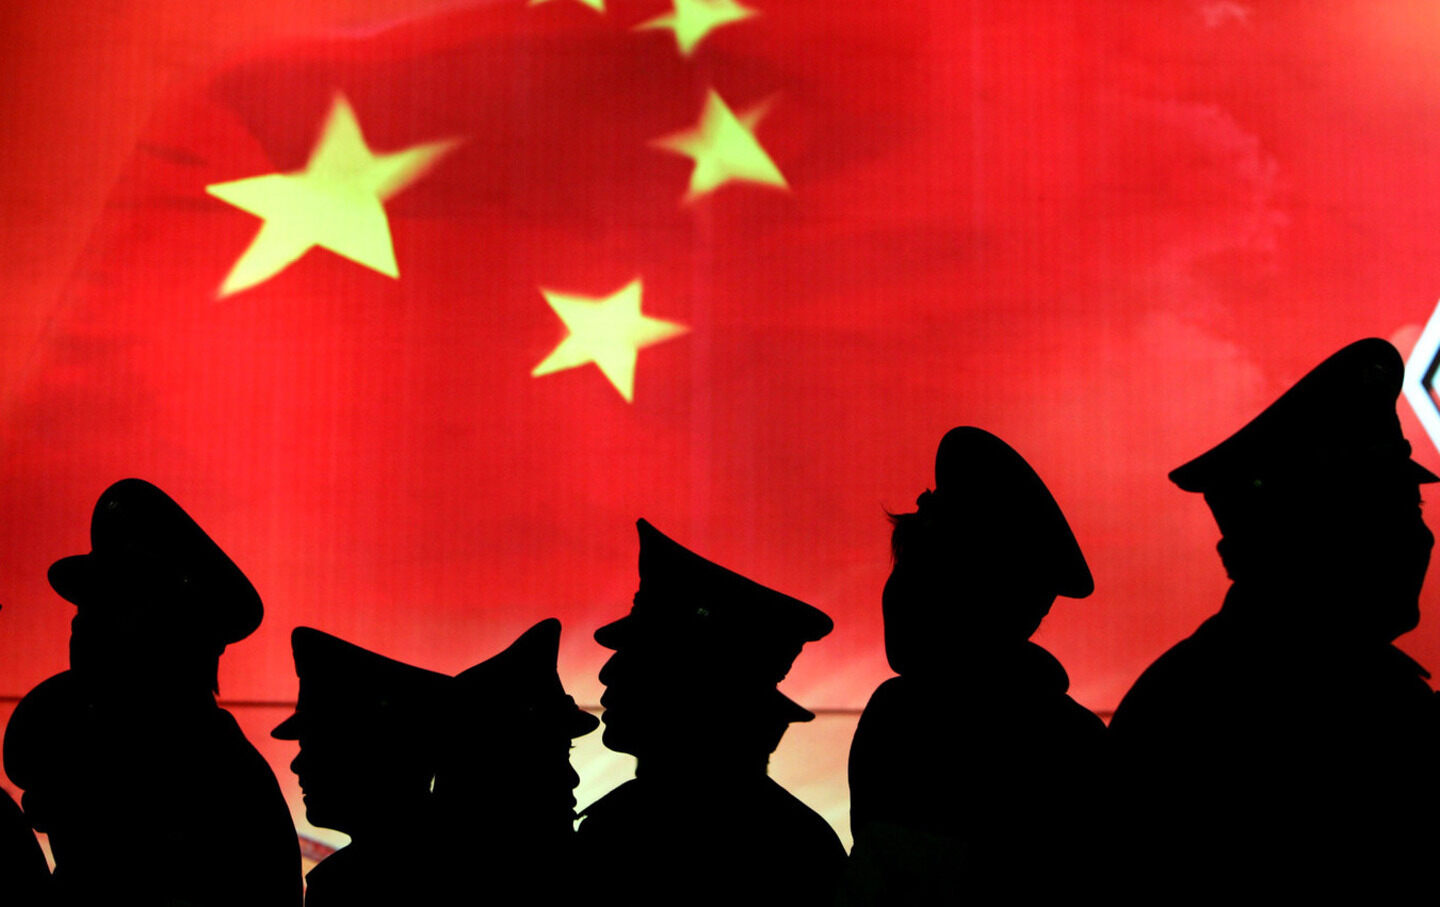 Security guards walk past the Chinese national flag at the Military Museum of Chinese People's Revolution on March 1, 2008, in Beijing, China.